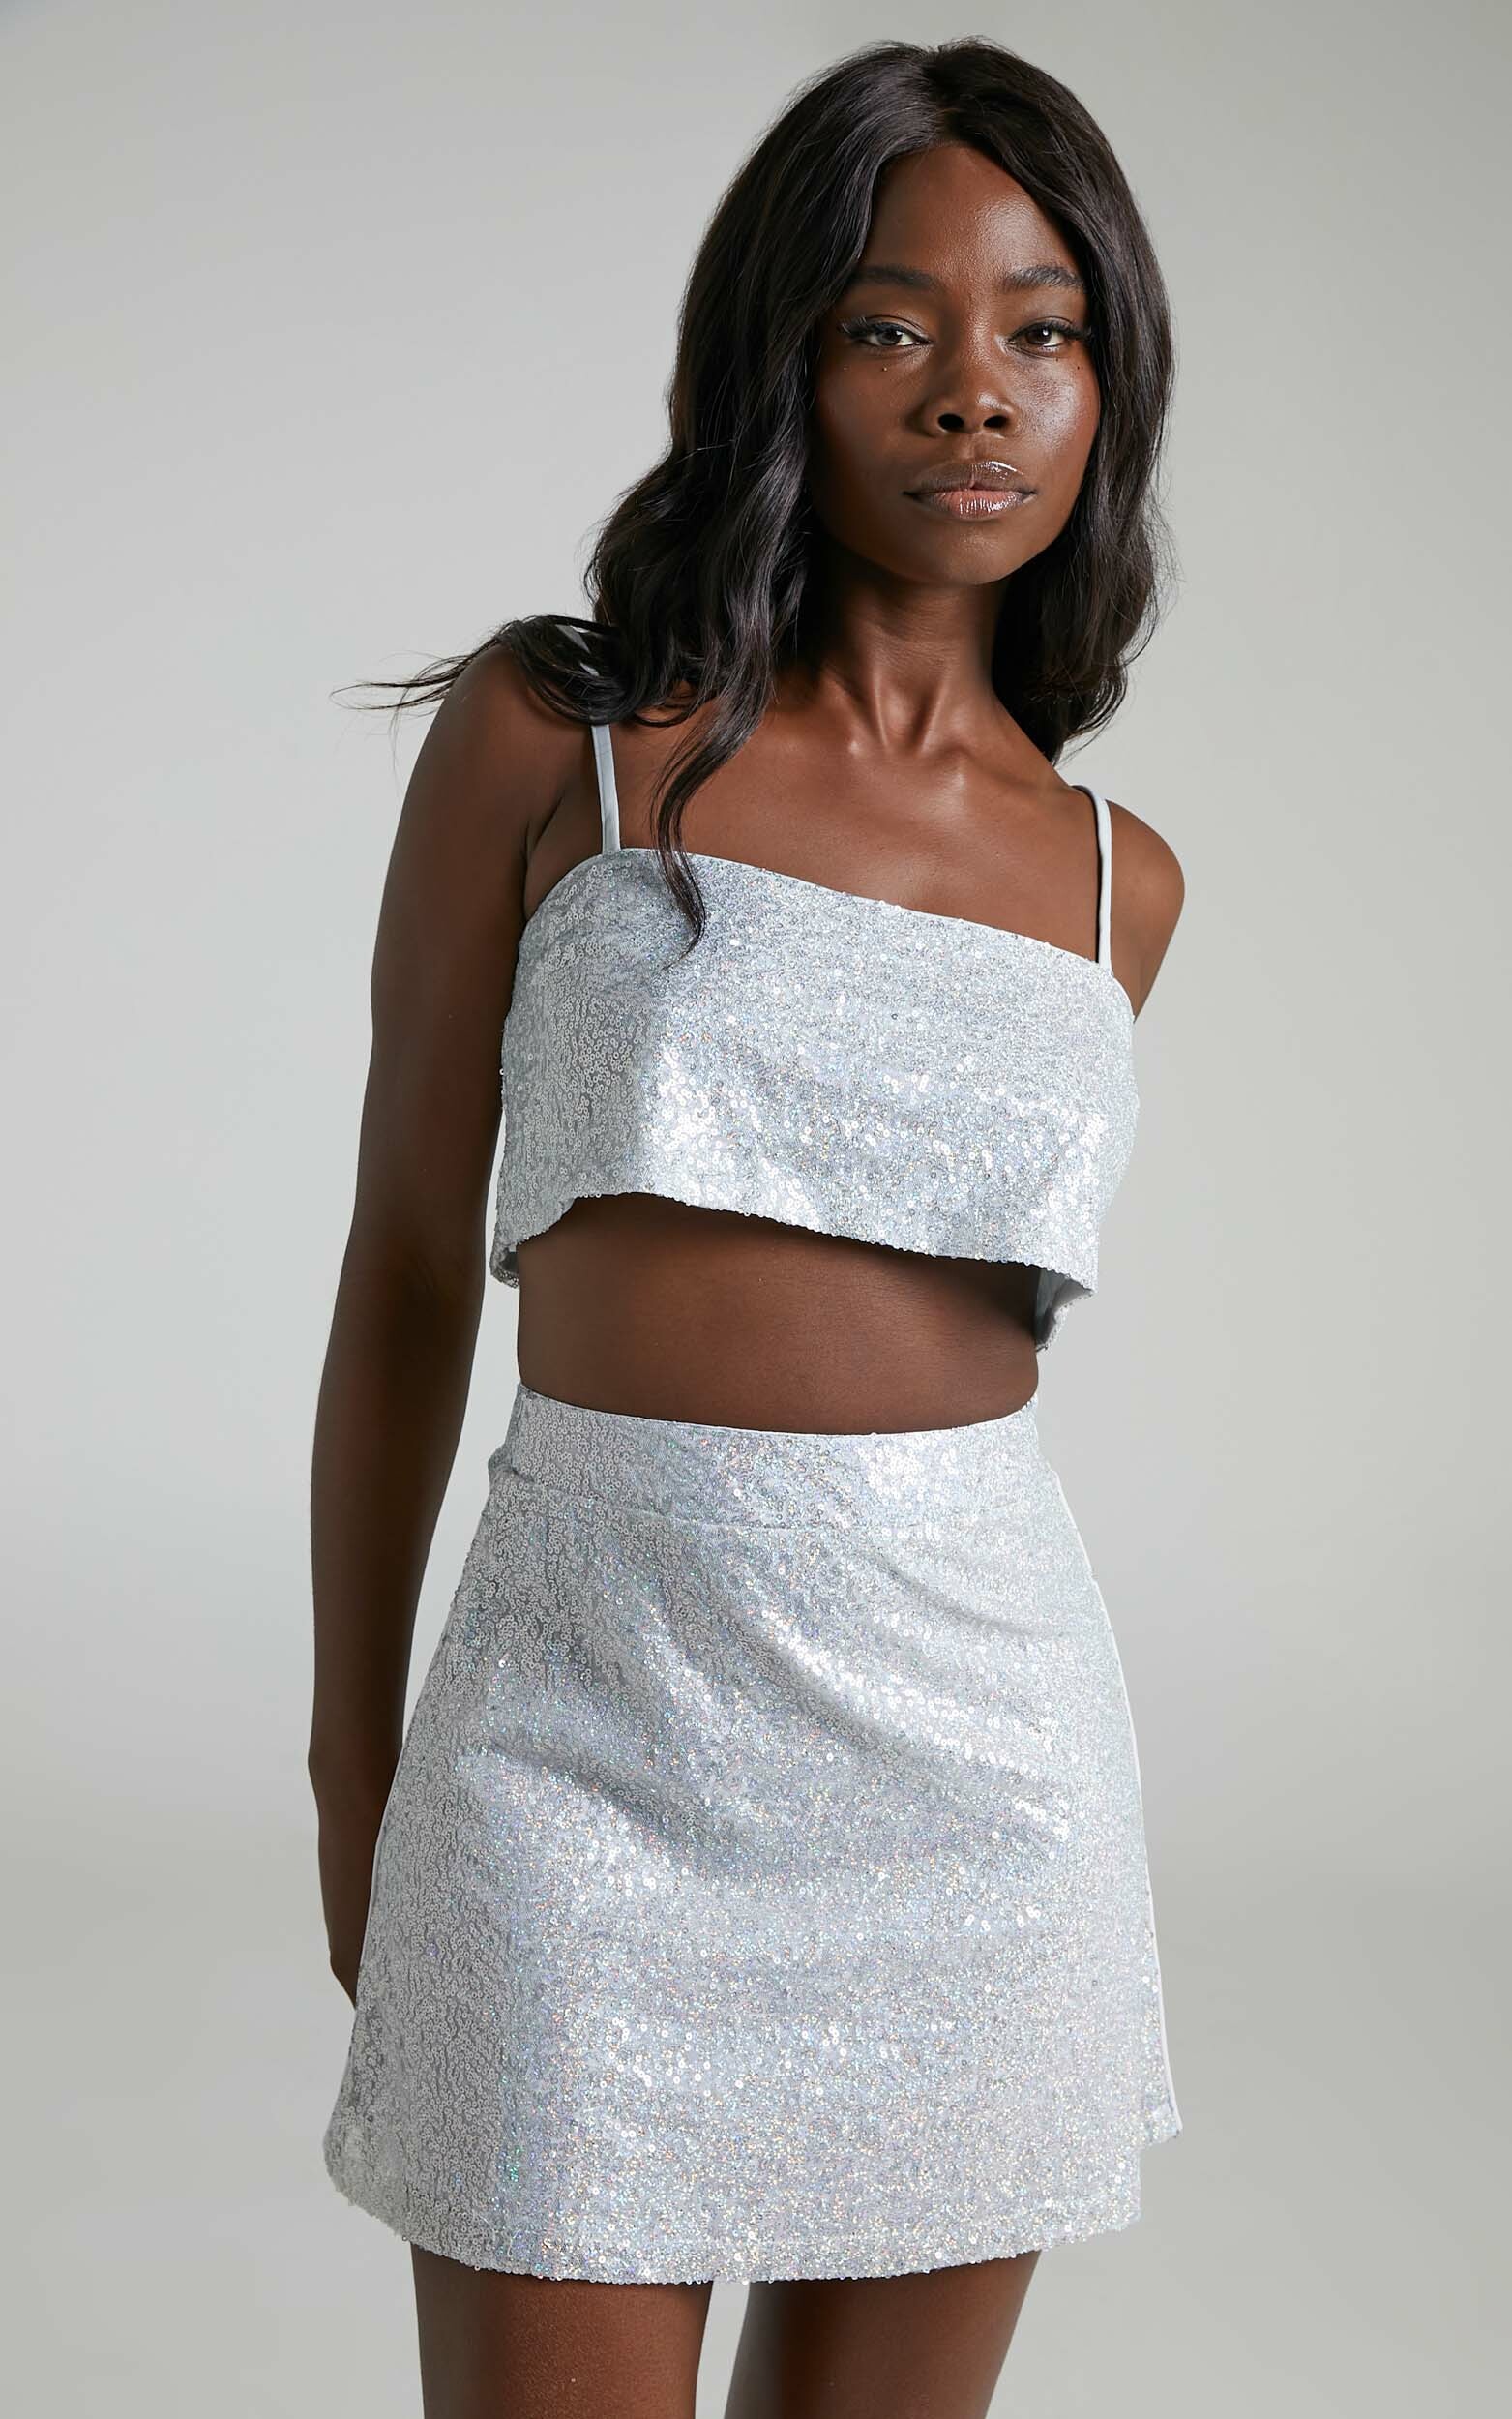 Creed Nøgle Sinis Elswyth Top - Strappy Sequin Crop Cami Top in Silver | Showpo USA